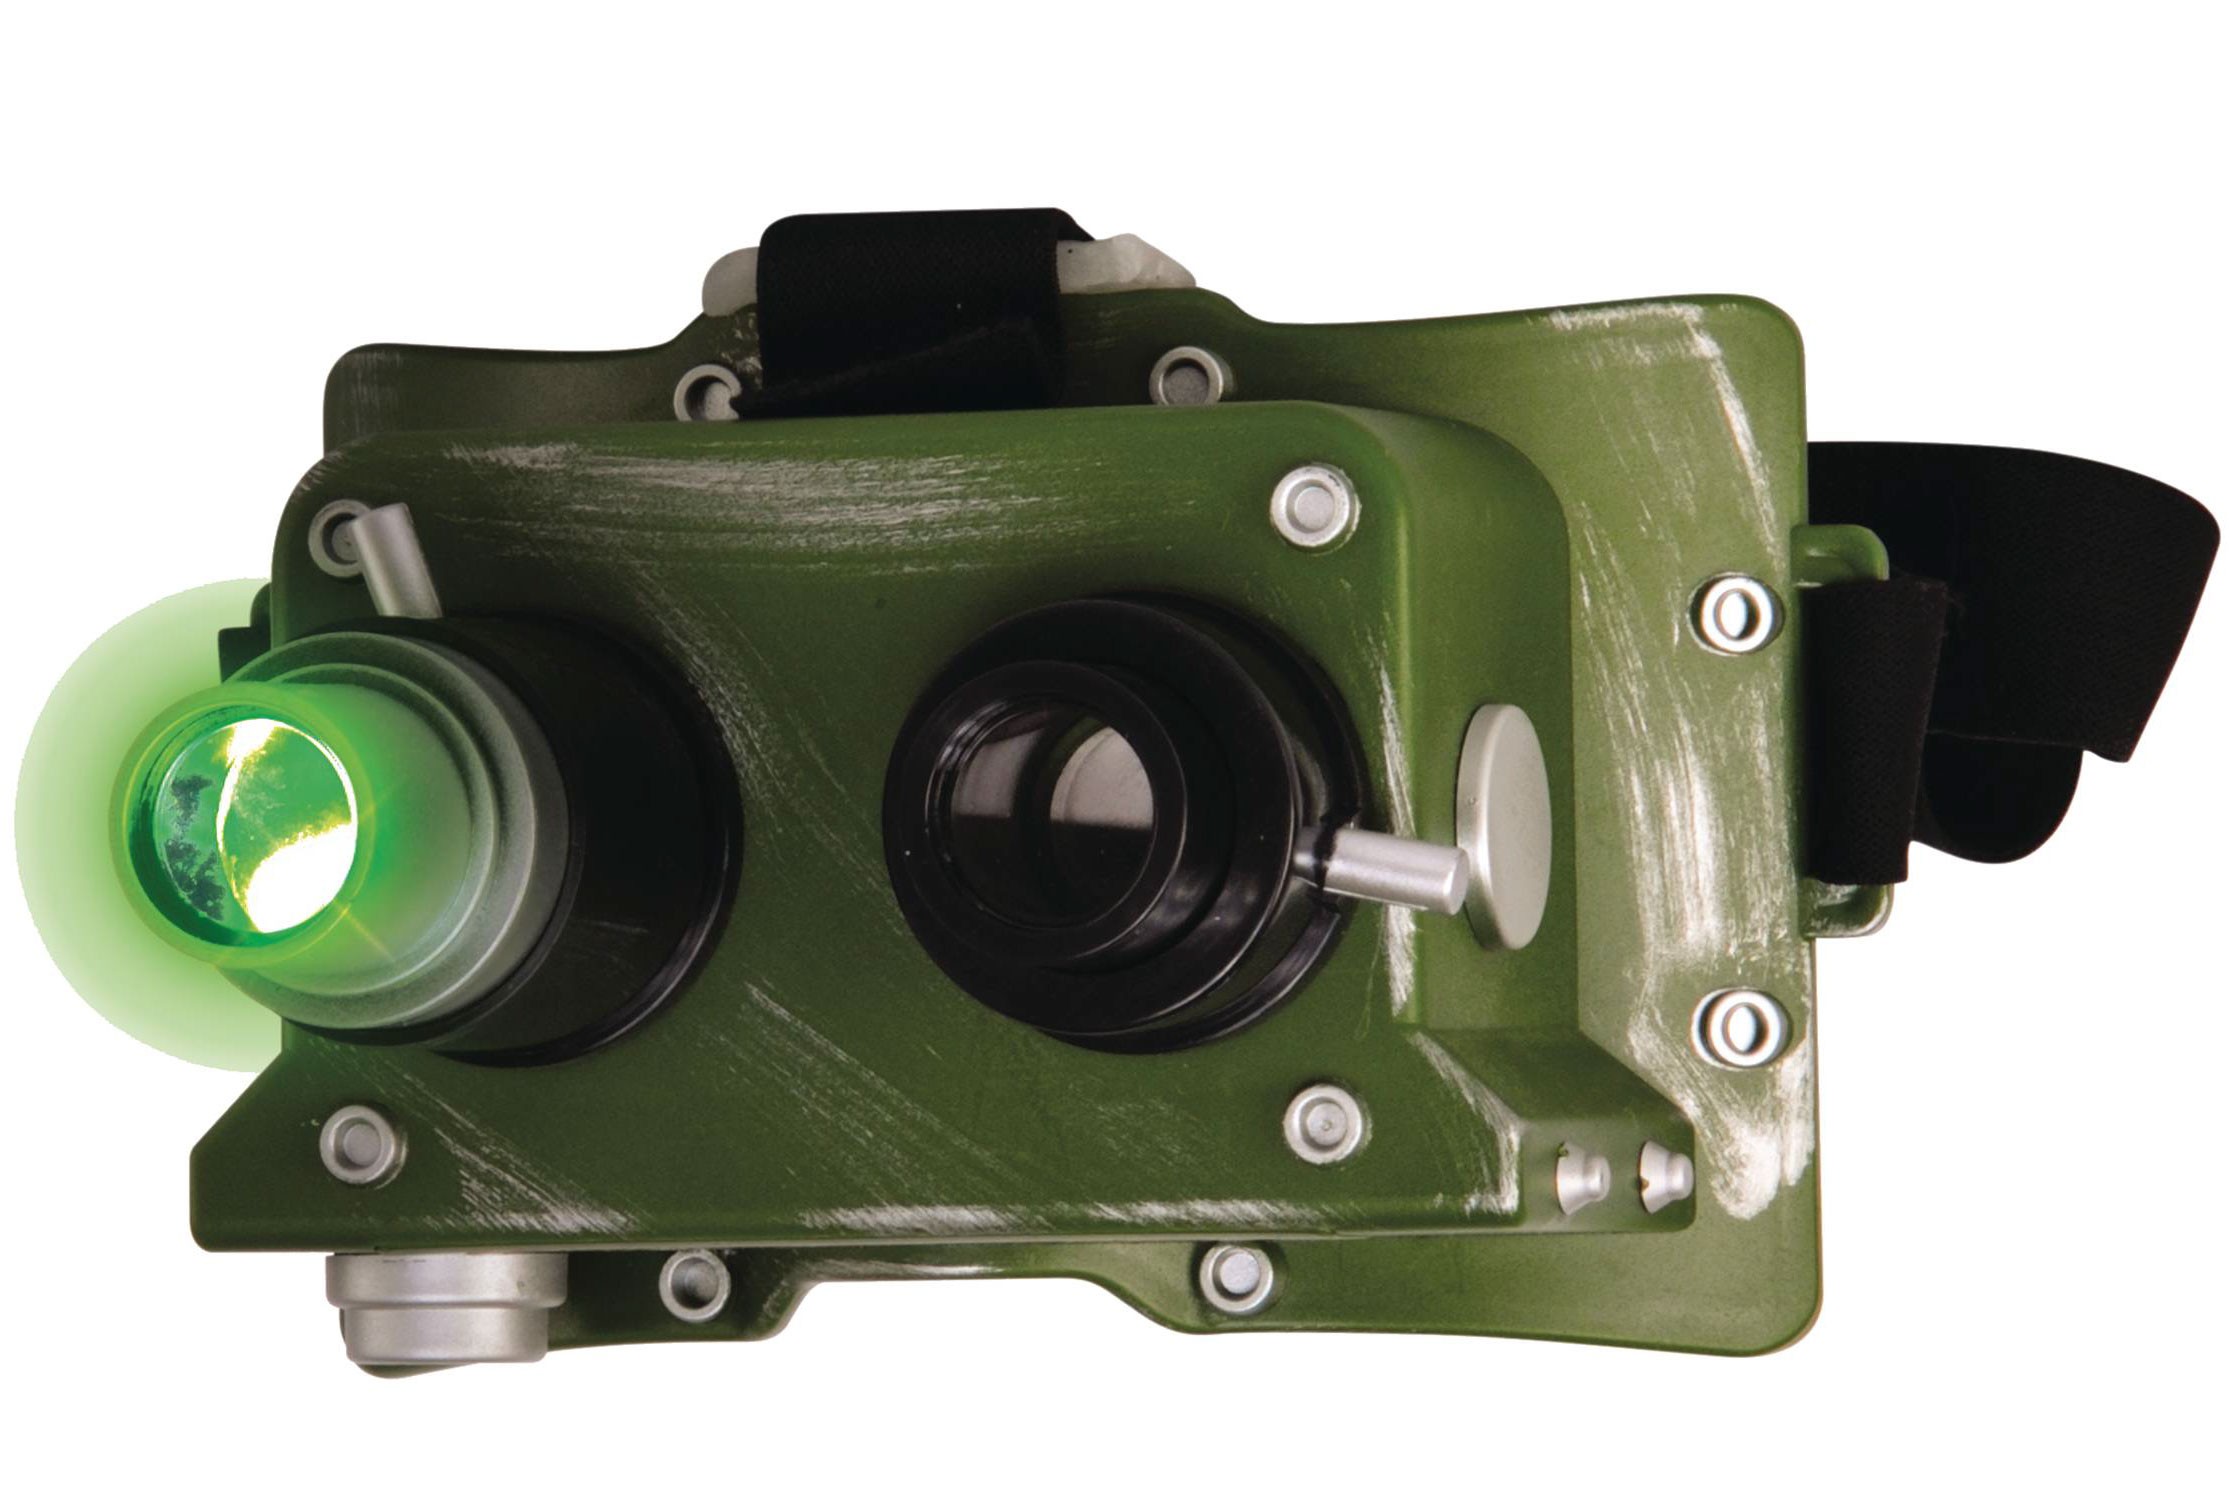 ghostbusters ecto goggles